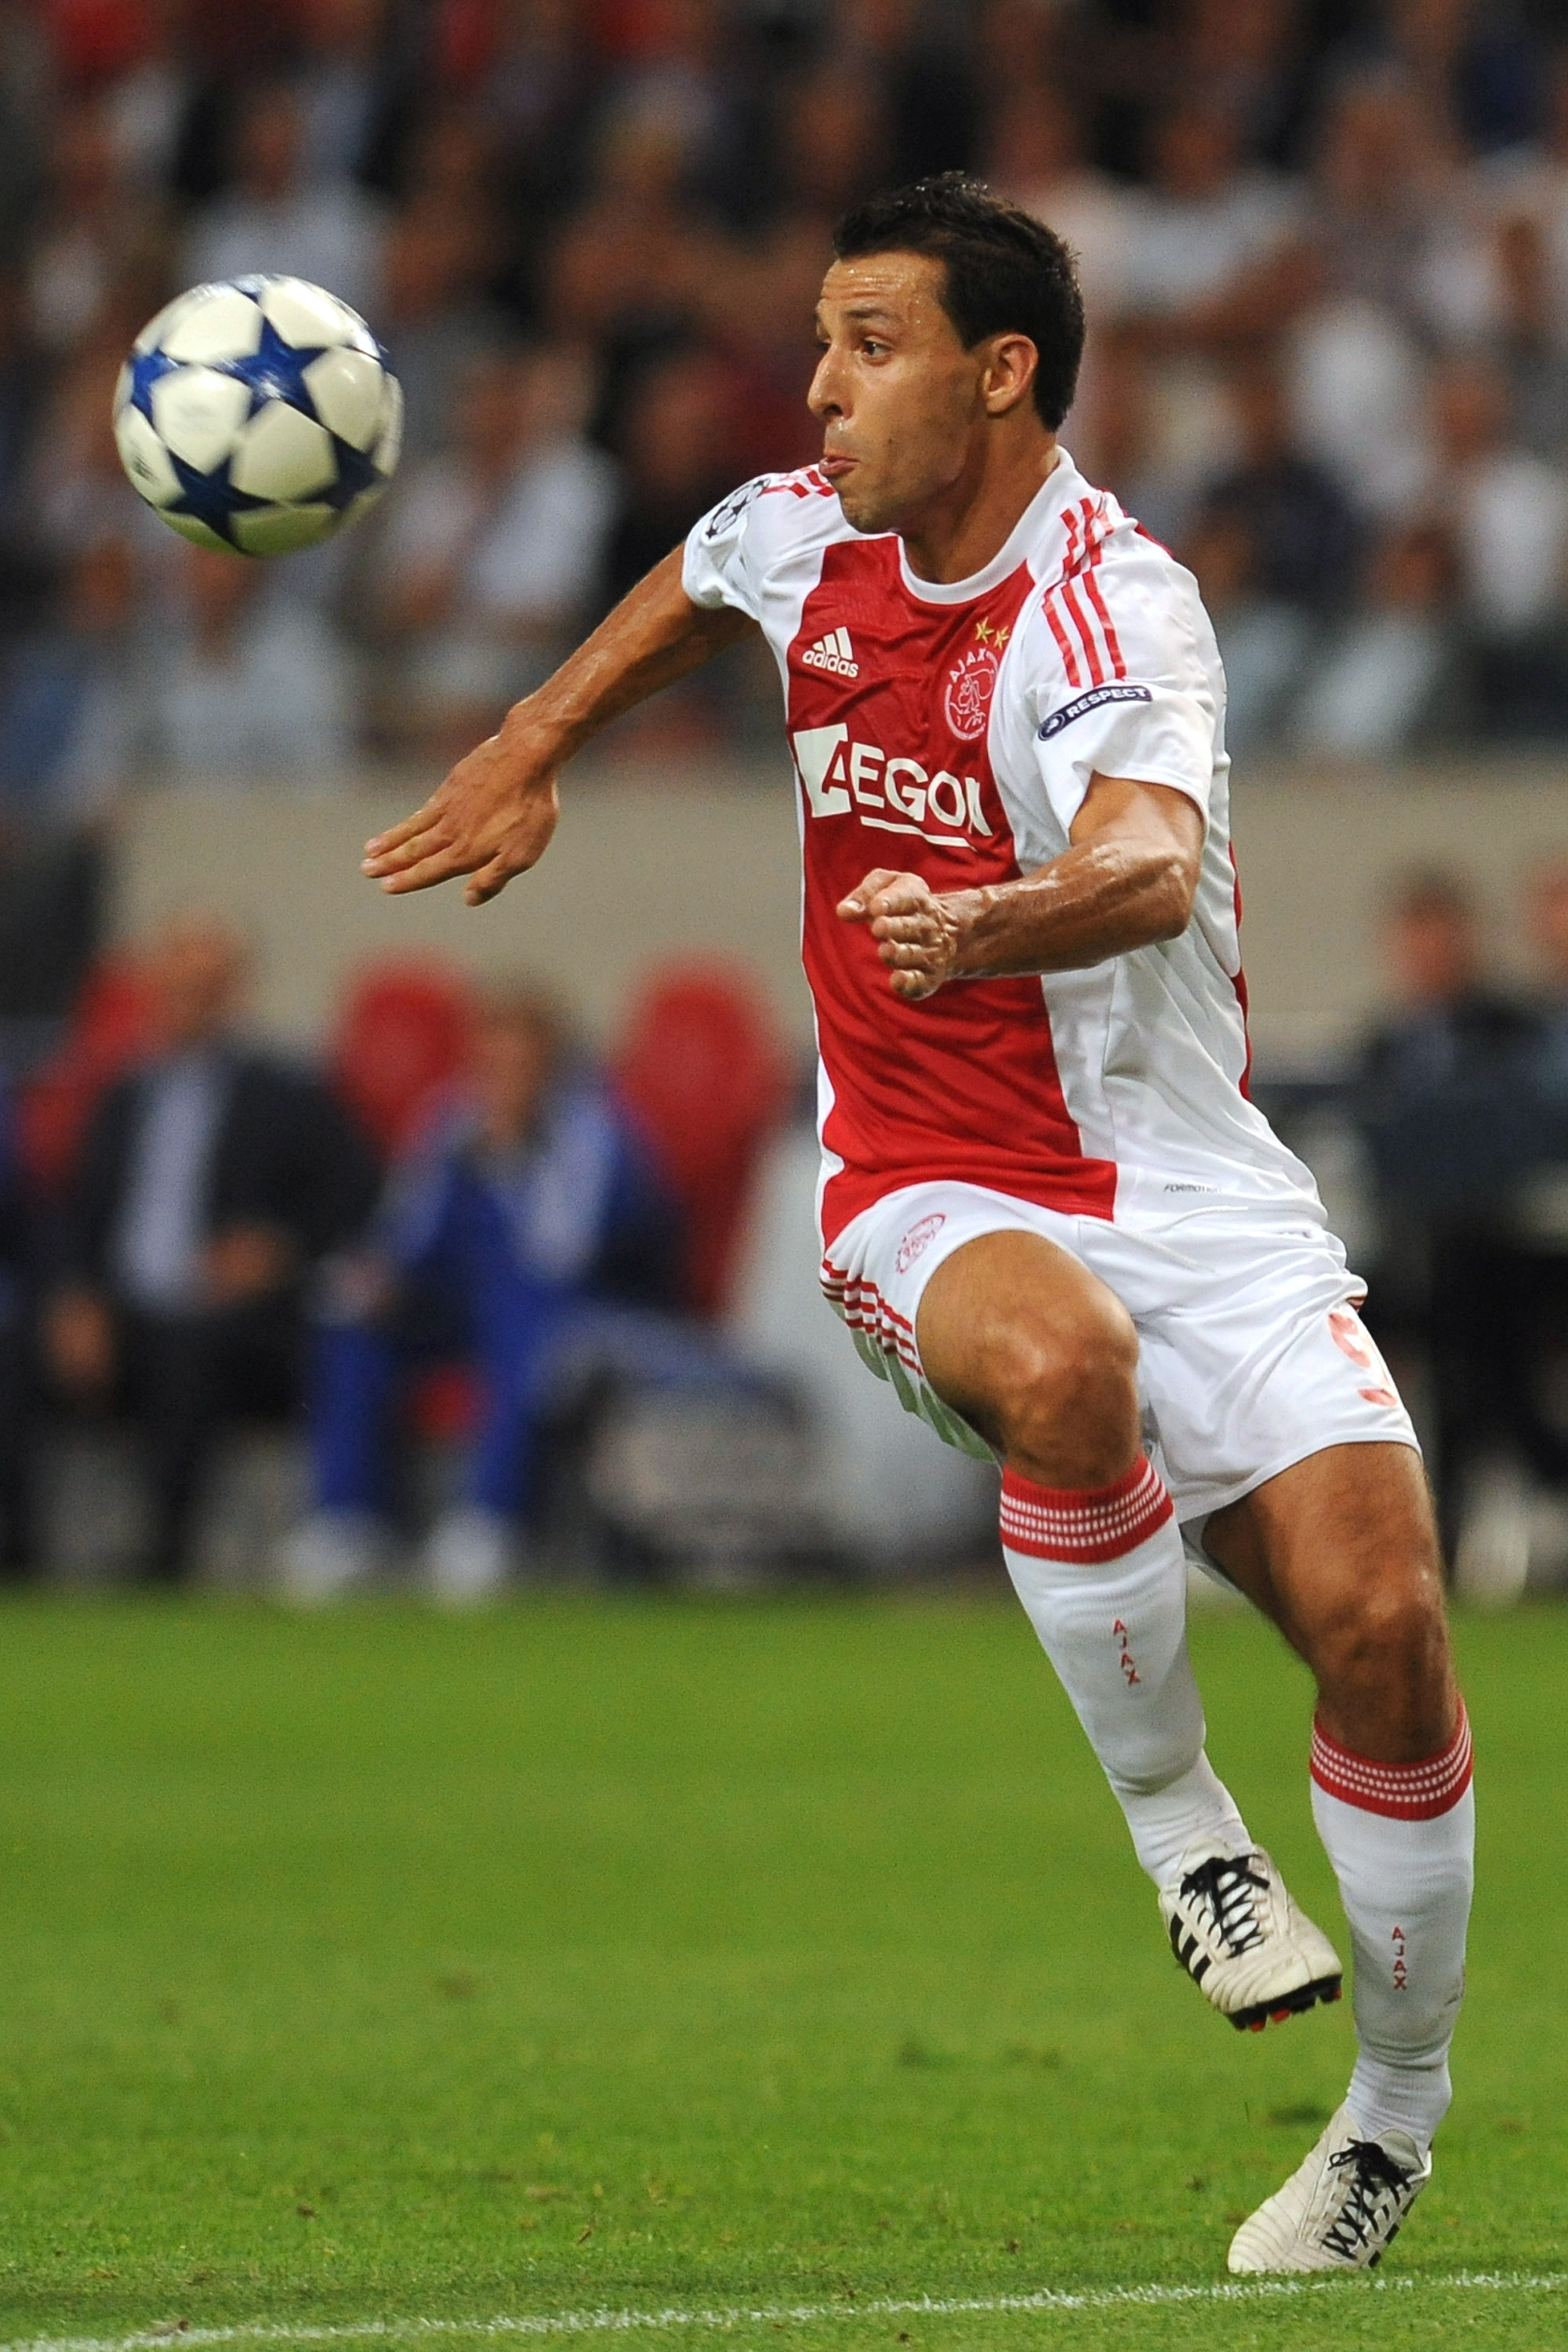 AMSTERDAM, NETHERLANDS - AUGUST 25:  Mounir El Hamdaoui of AFC Ajax in action during the Champions League Play-off match between AFC Ajax and FC Dynamo Kiev at Amsterdam Arena on August 25, 2010 in Amsterdam, Netherlands.  (Photo by Valerio Pennicino/Gett